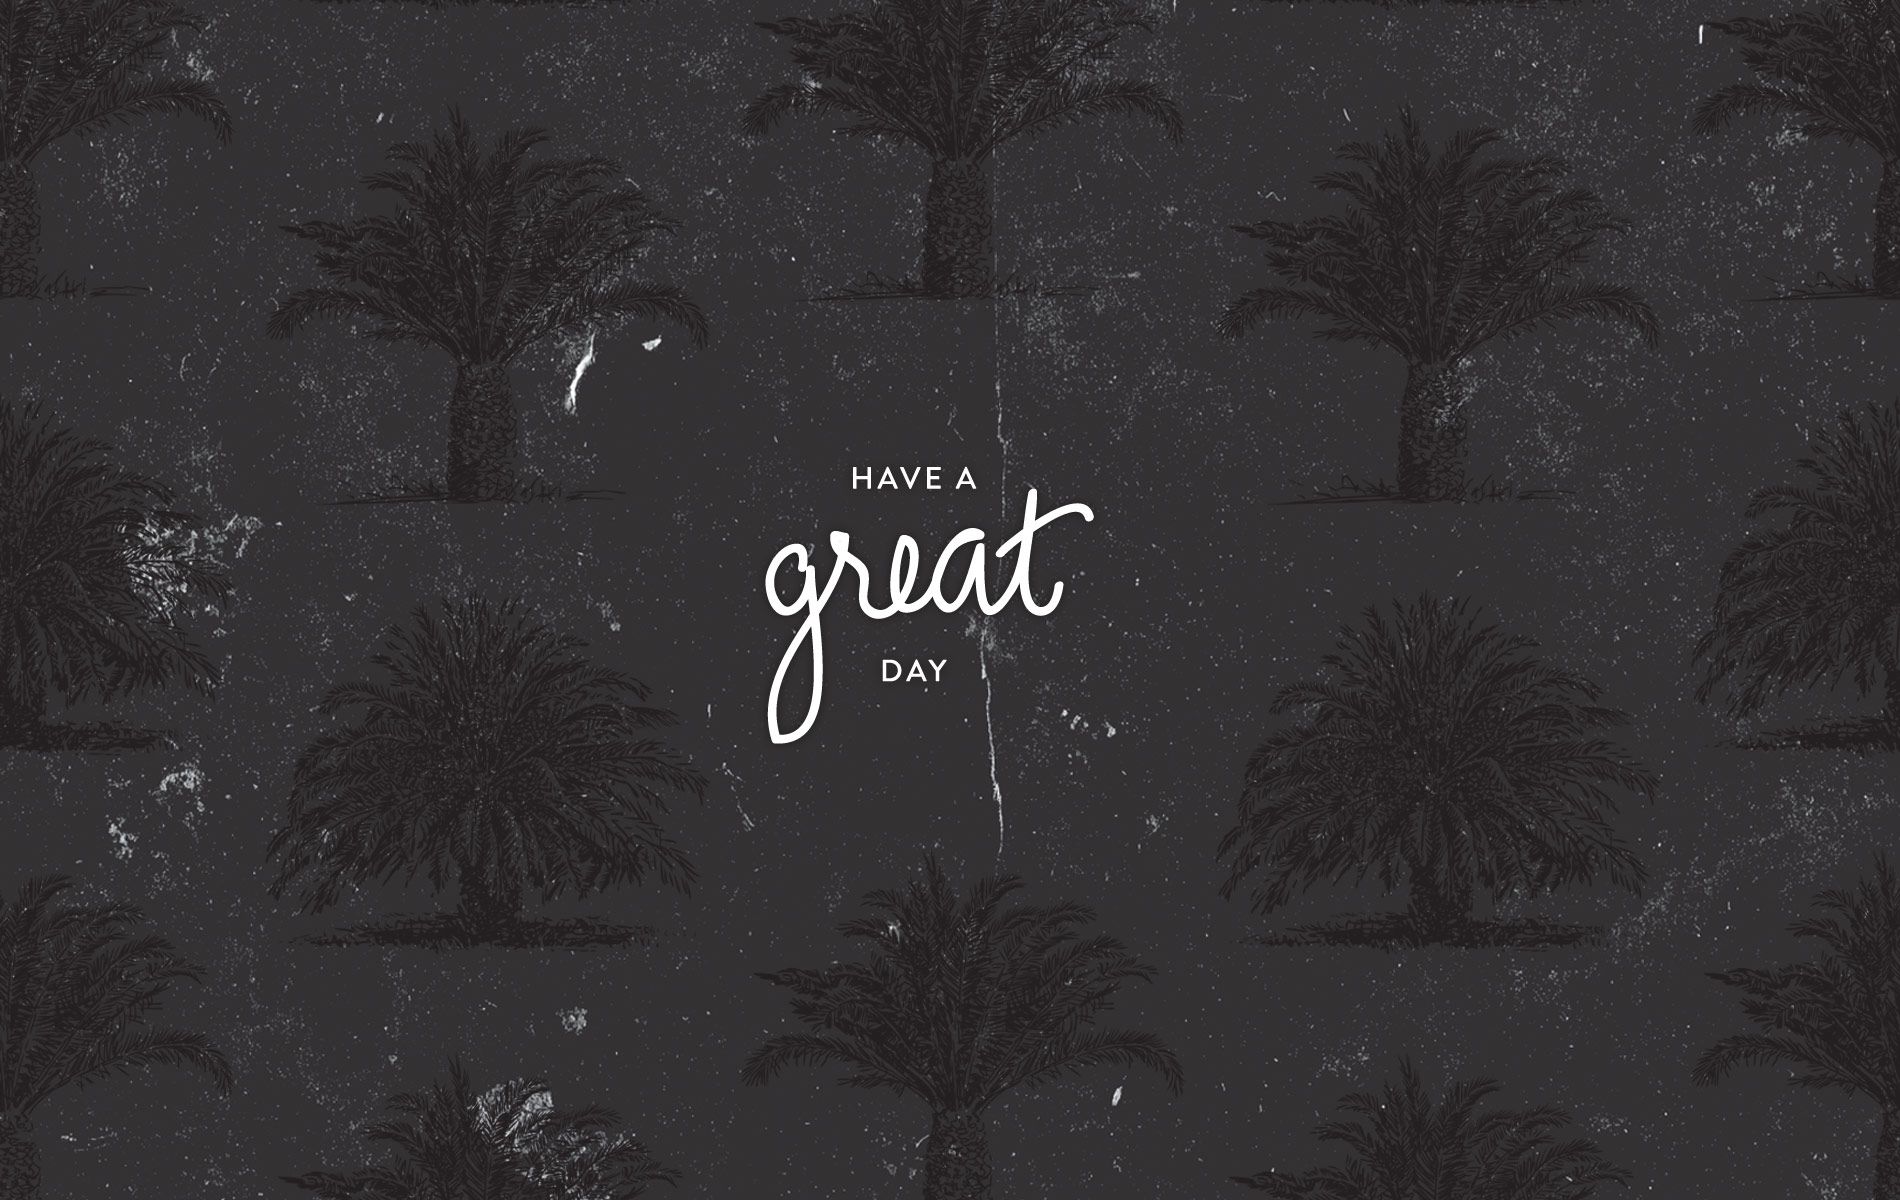 Have a great day wallpaper - IMac, gray